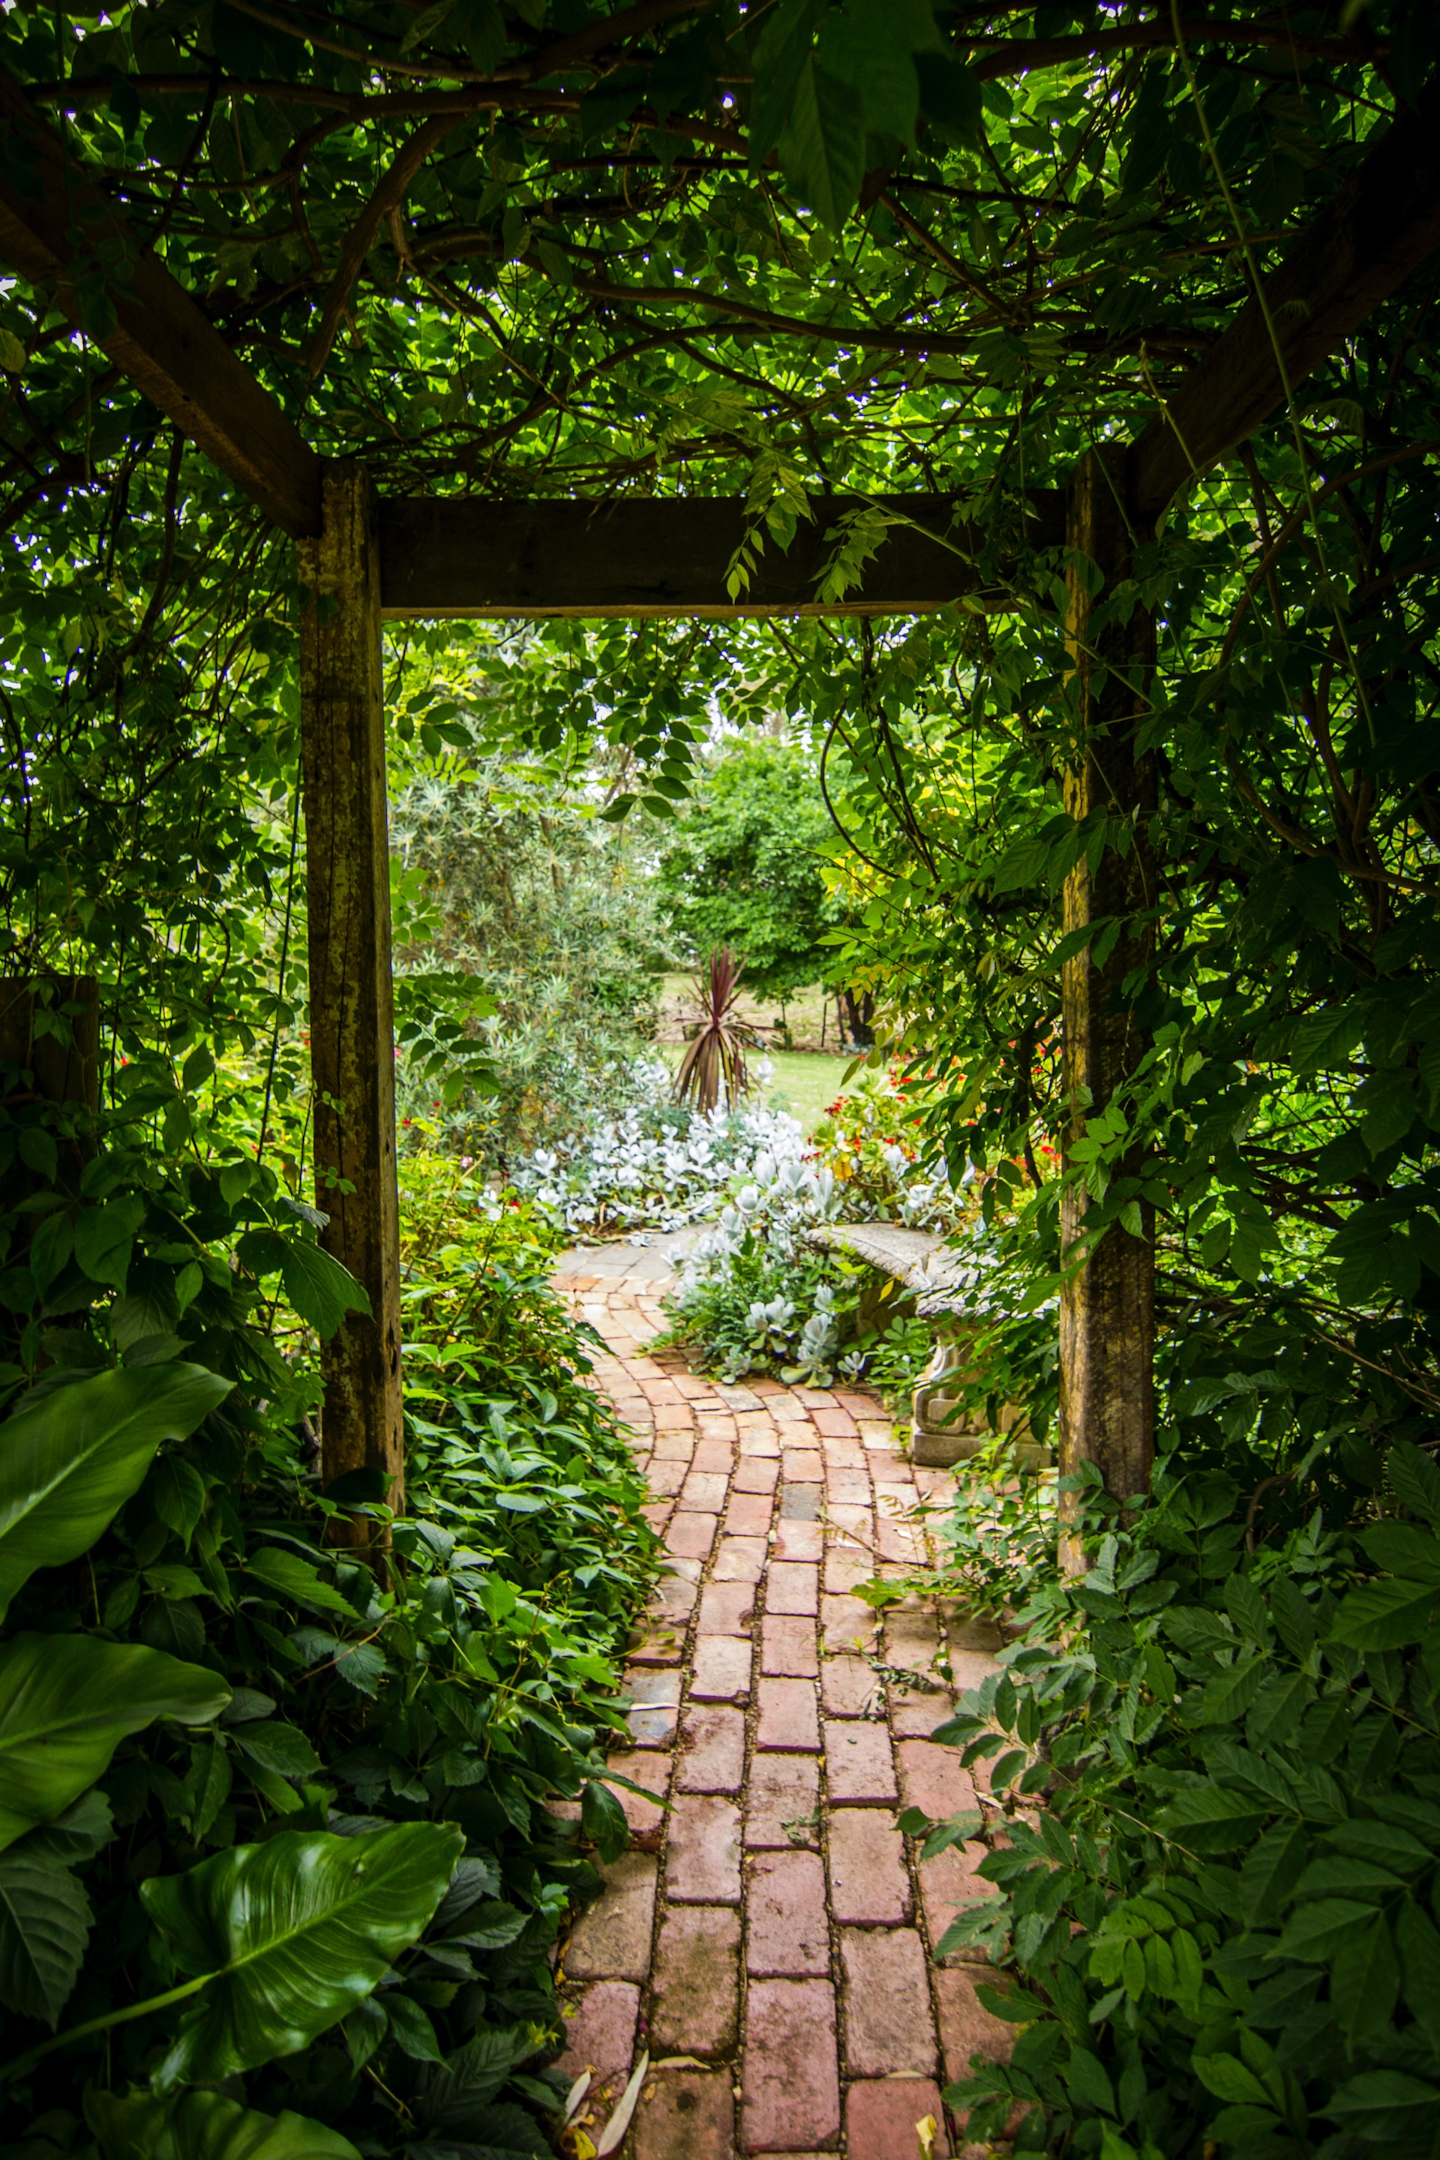 Wales garden path winding through a trellis of green leaves